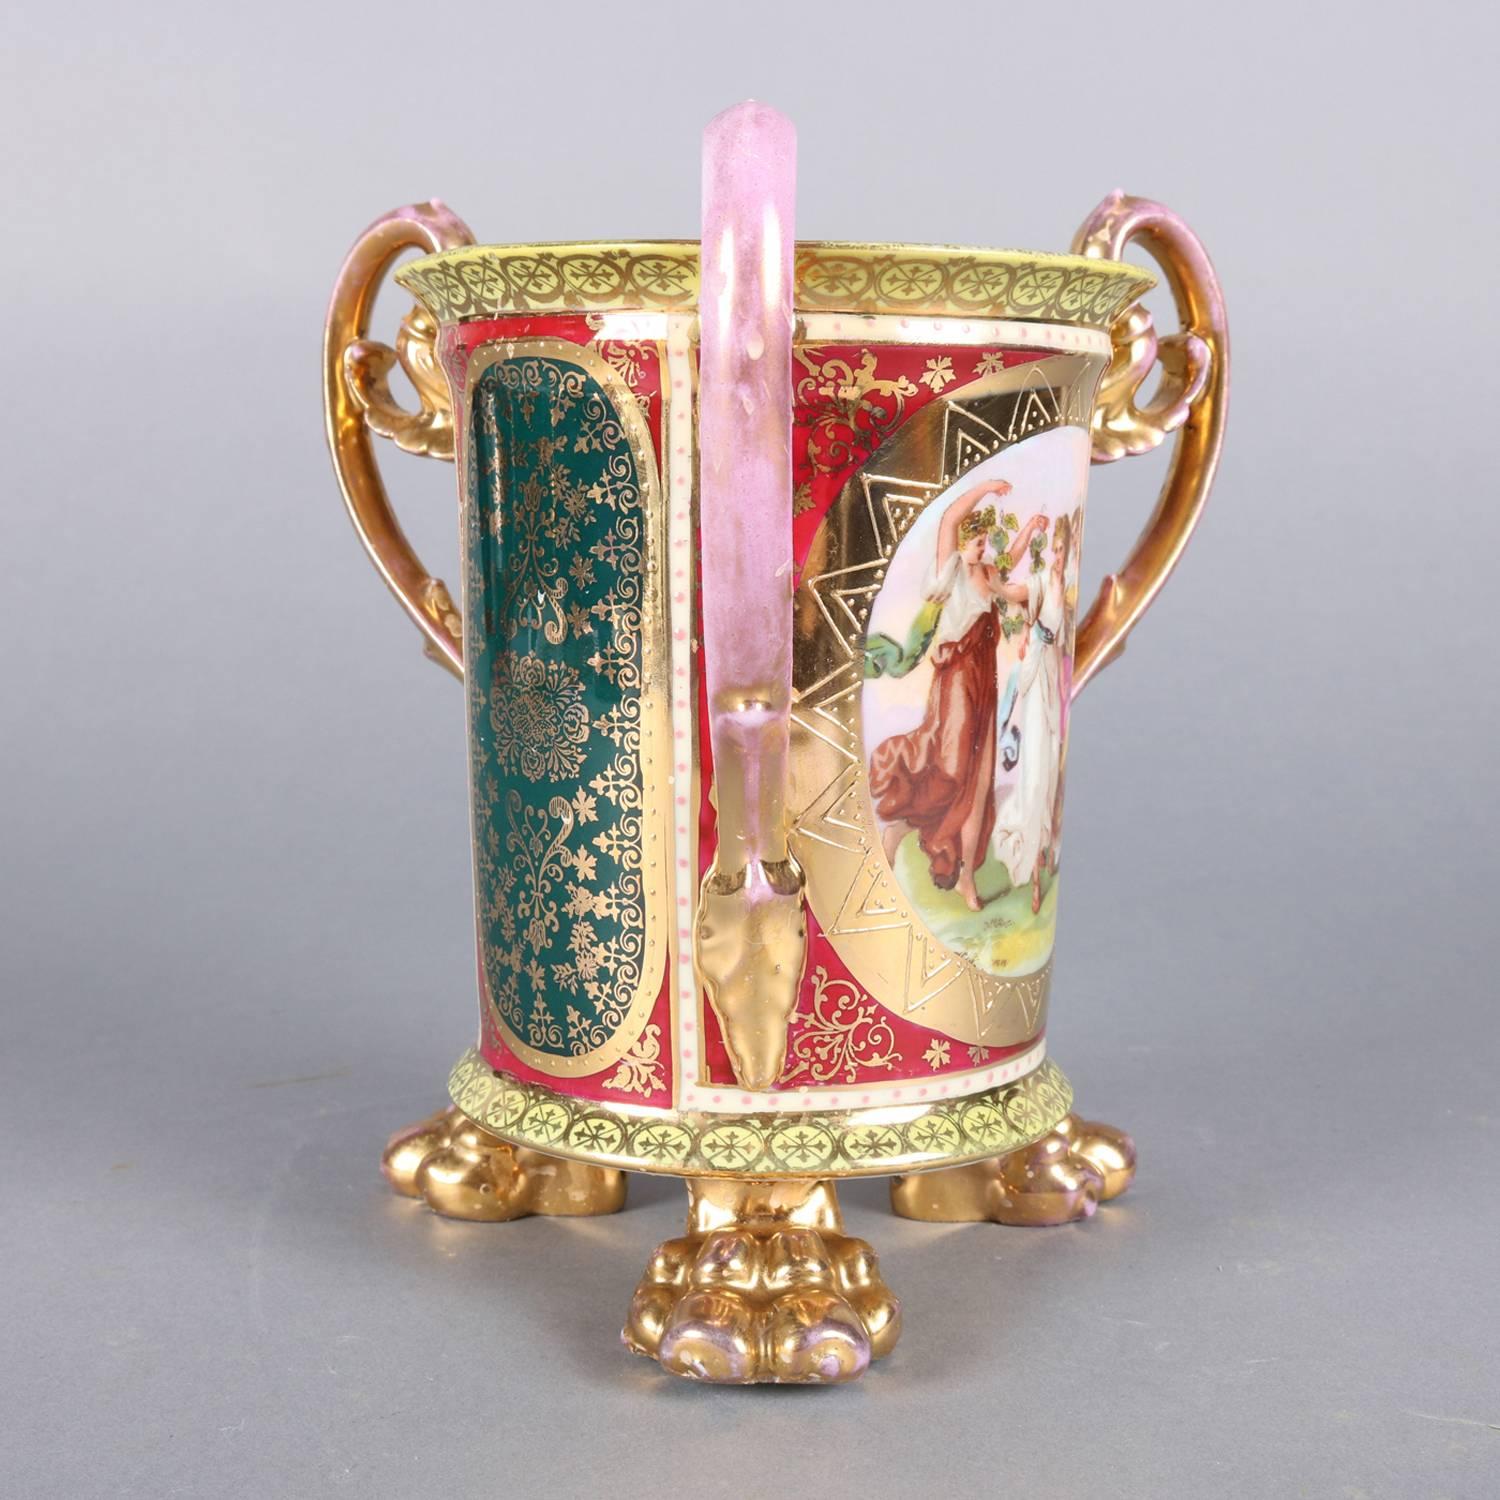 Porcelain Austrian Royal Vienna Hand-Painted and Gilt 3-Handled Loving Cup, circa 1890